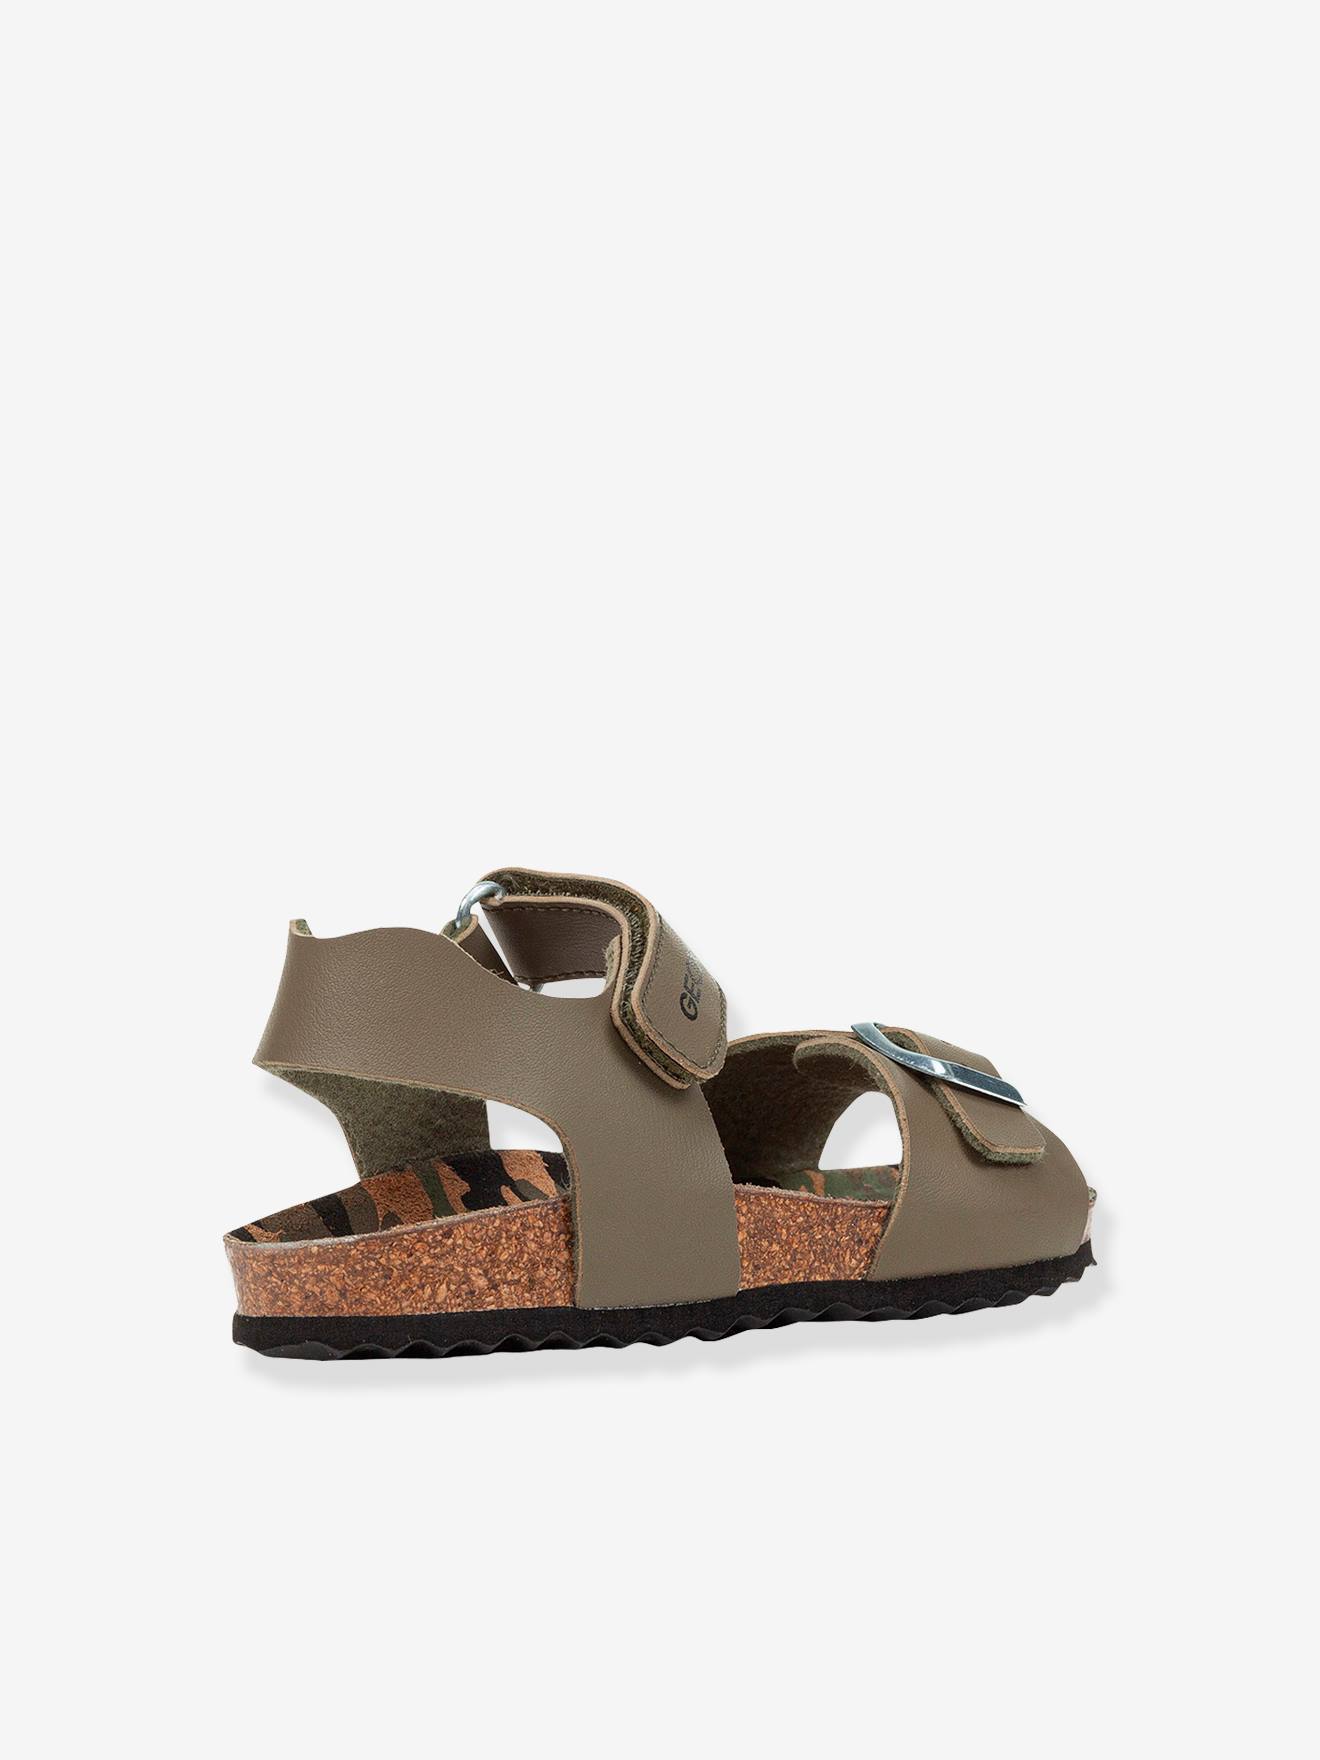 Sandals for Children, B by - green solid,